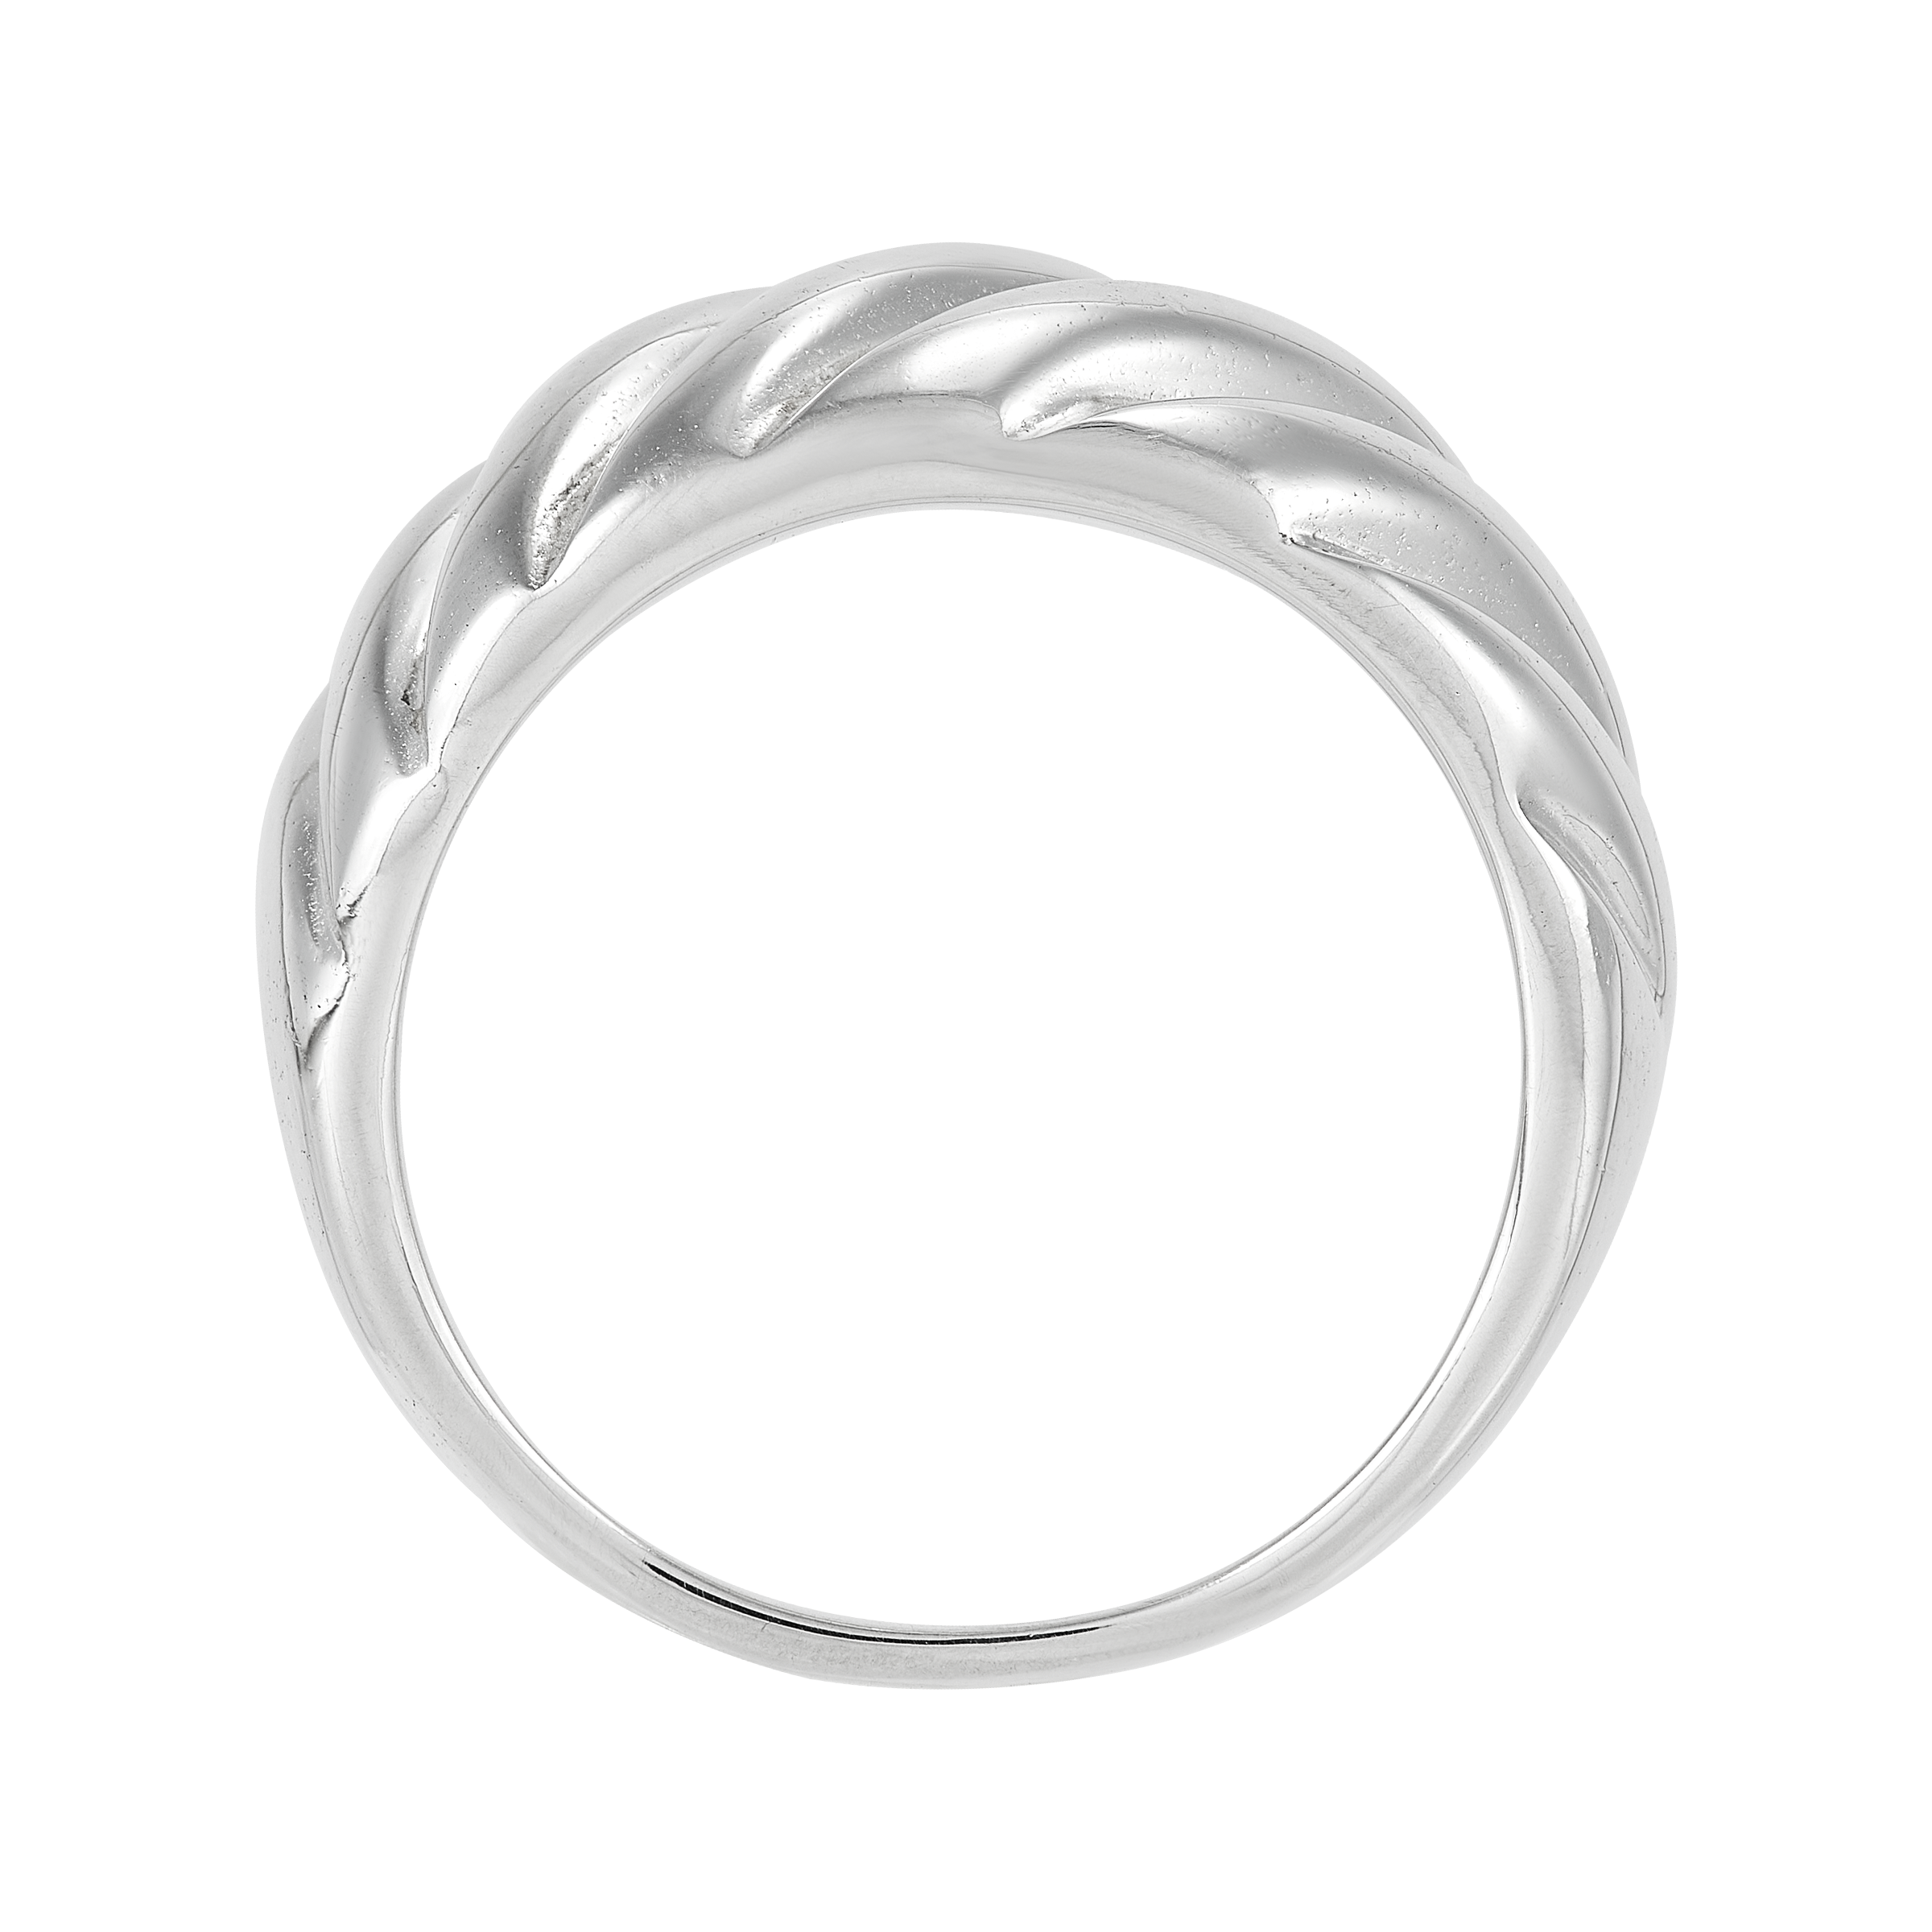 Whole 925 Sterling Silver Plated Fashion Net Ring Silpada Jewelry  LKNSPCR040207Q From Yscrd, $30.91